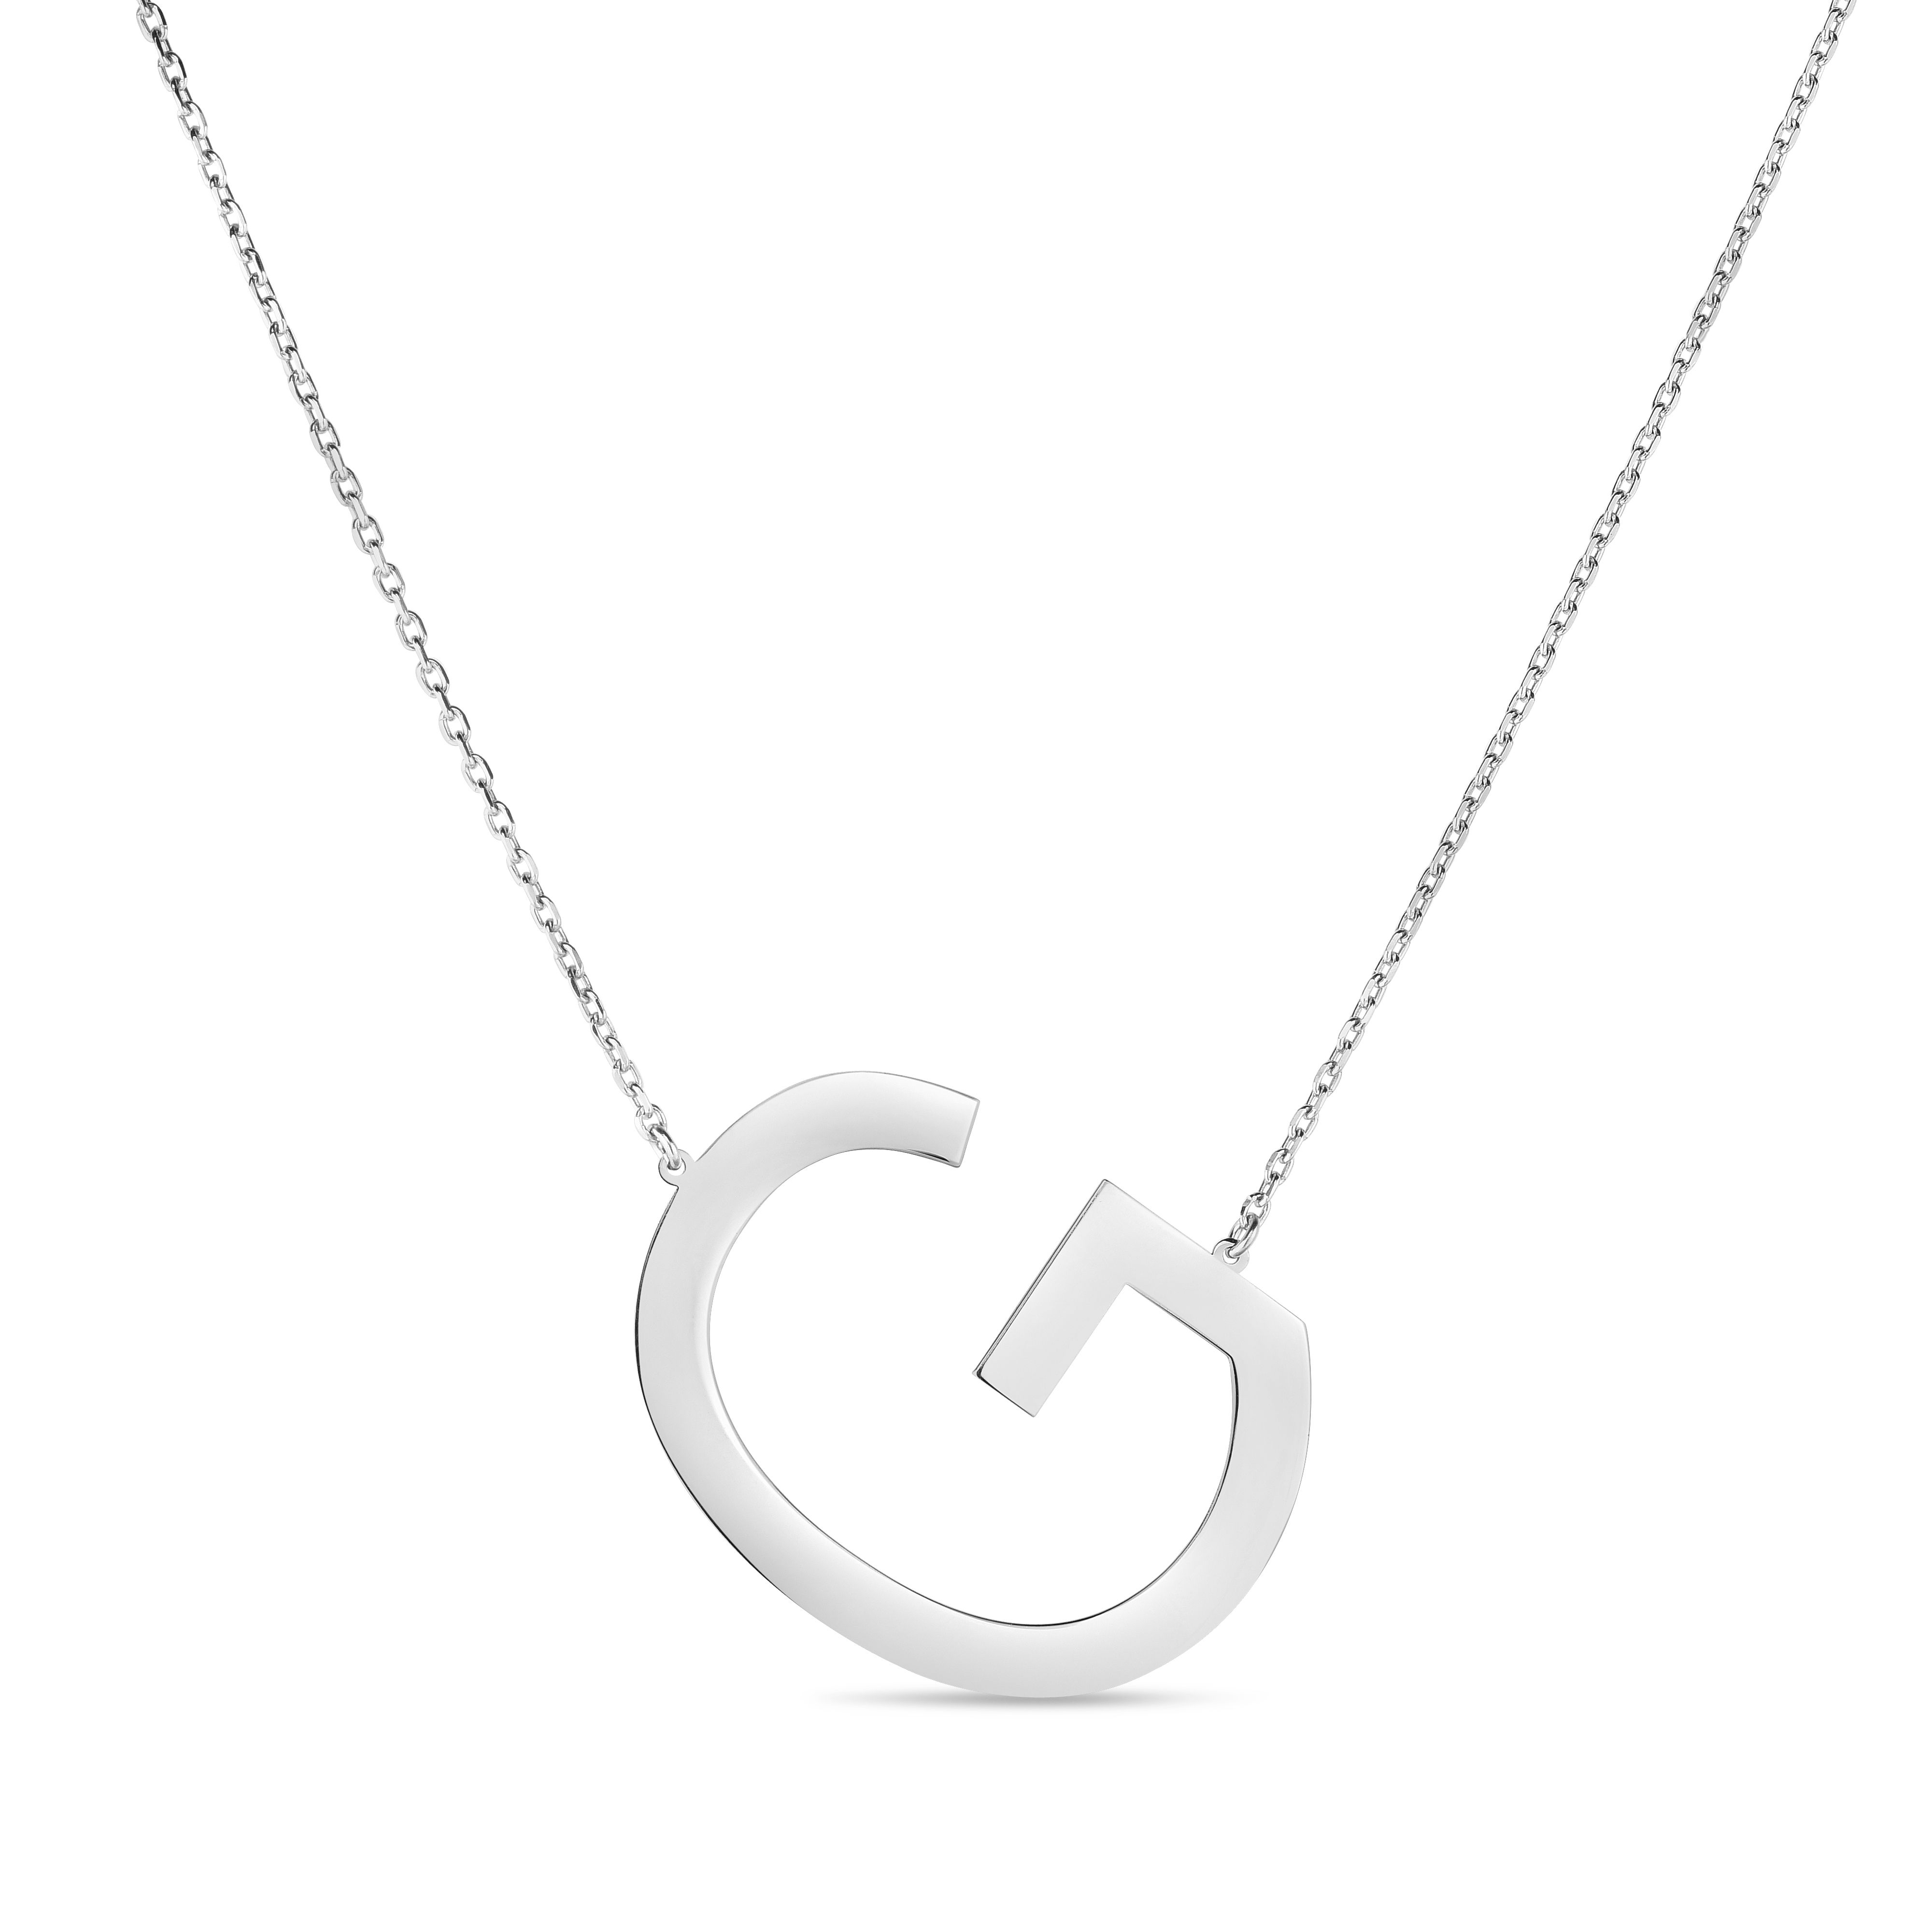 JewelersClub 1/4 CTW Black Diamond Initial Letter Pendant Necklace for  Women | .925 Sterling Silver G Alphabet Monogram Necklaces for Girls |  Script Capital Letters | Personalized Jewelry Gift for Her - Walmart.com